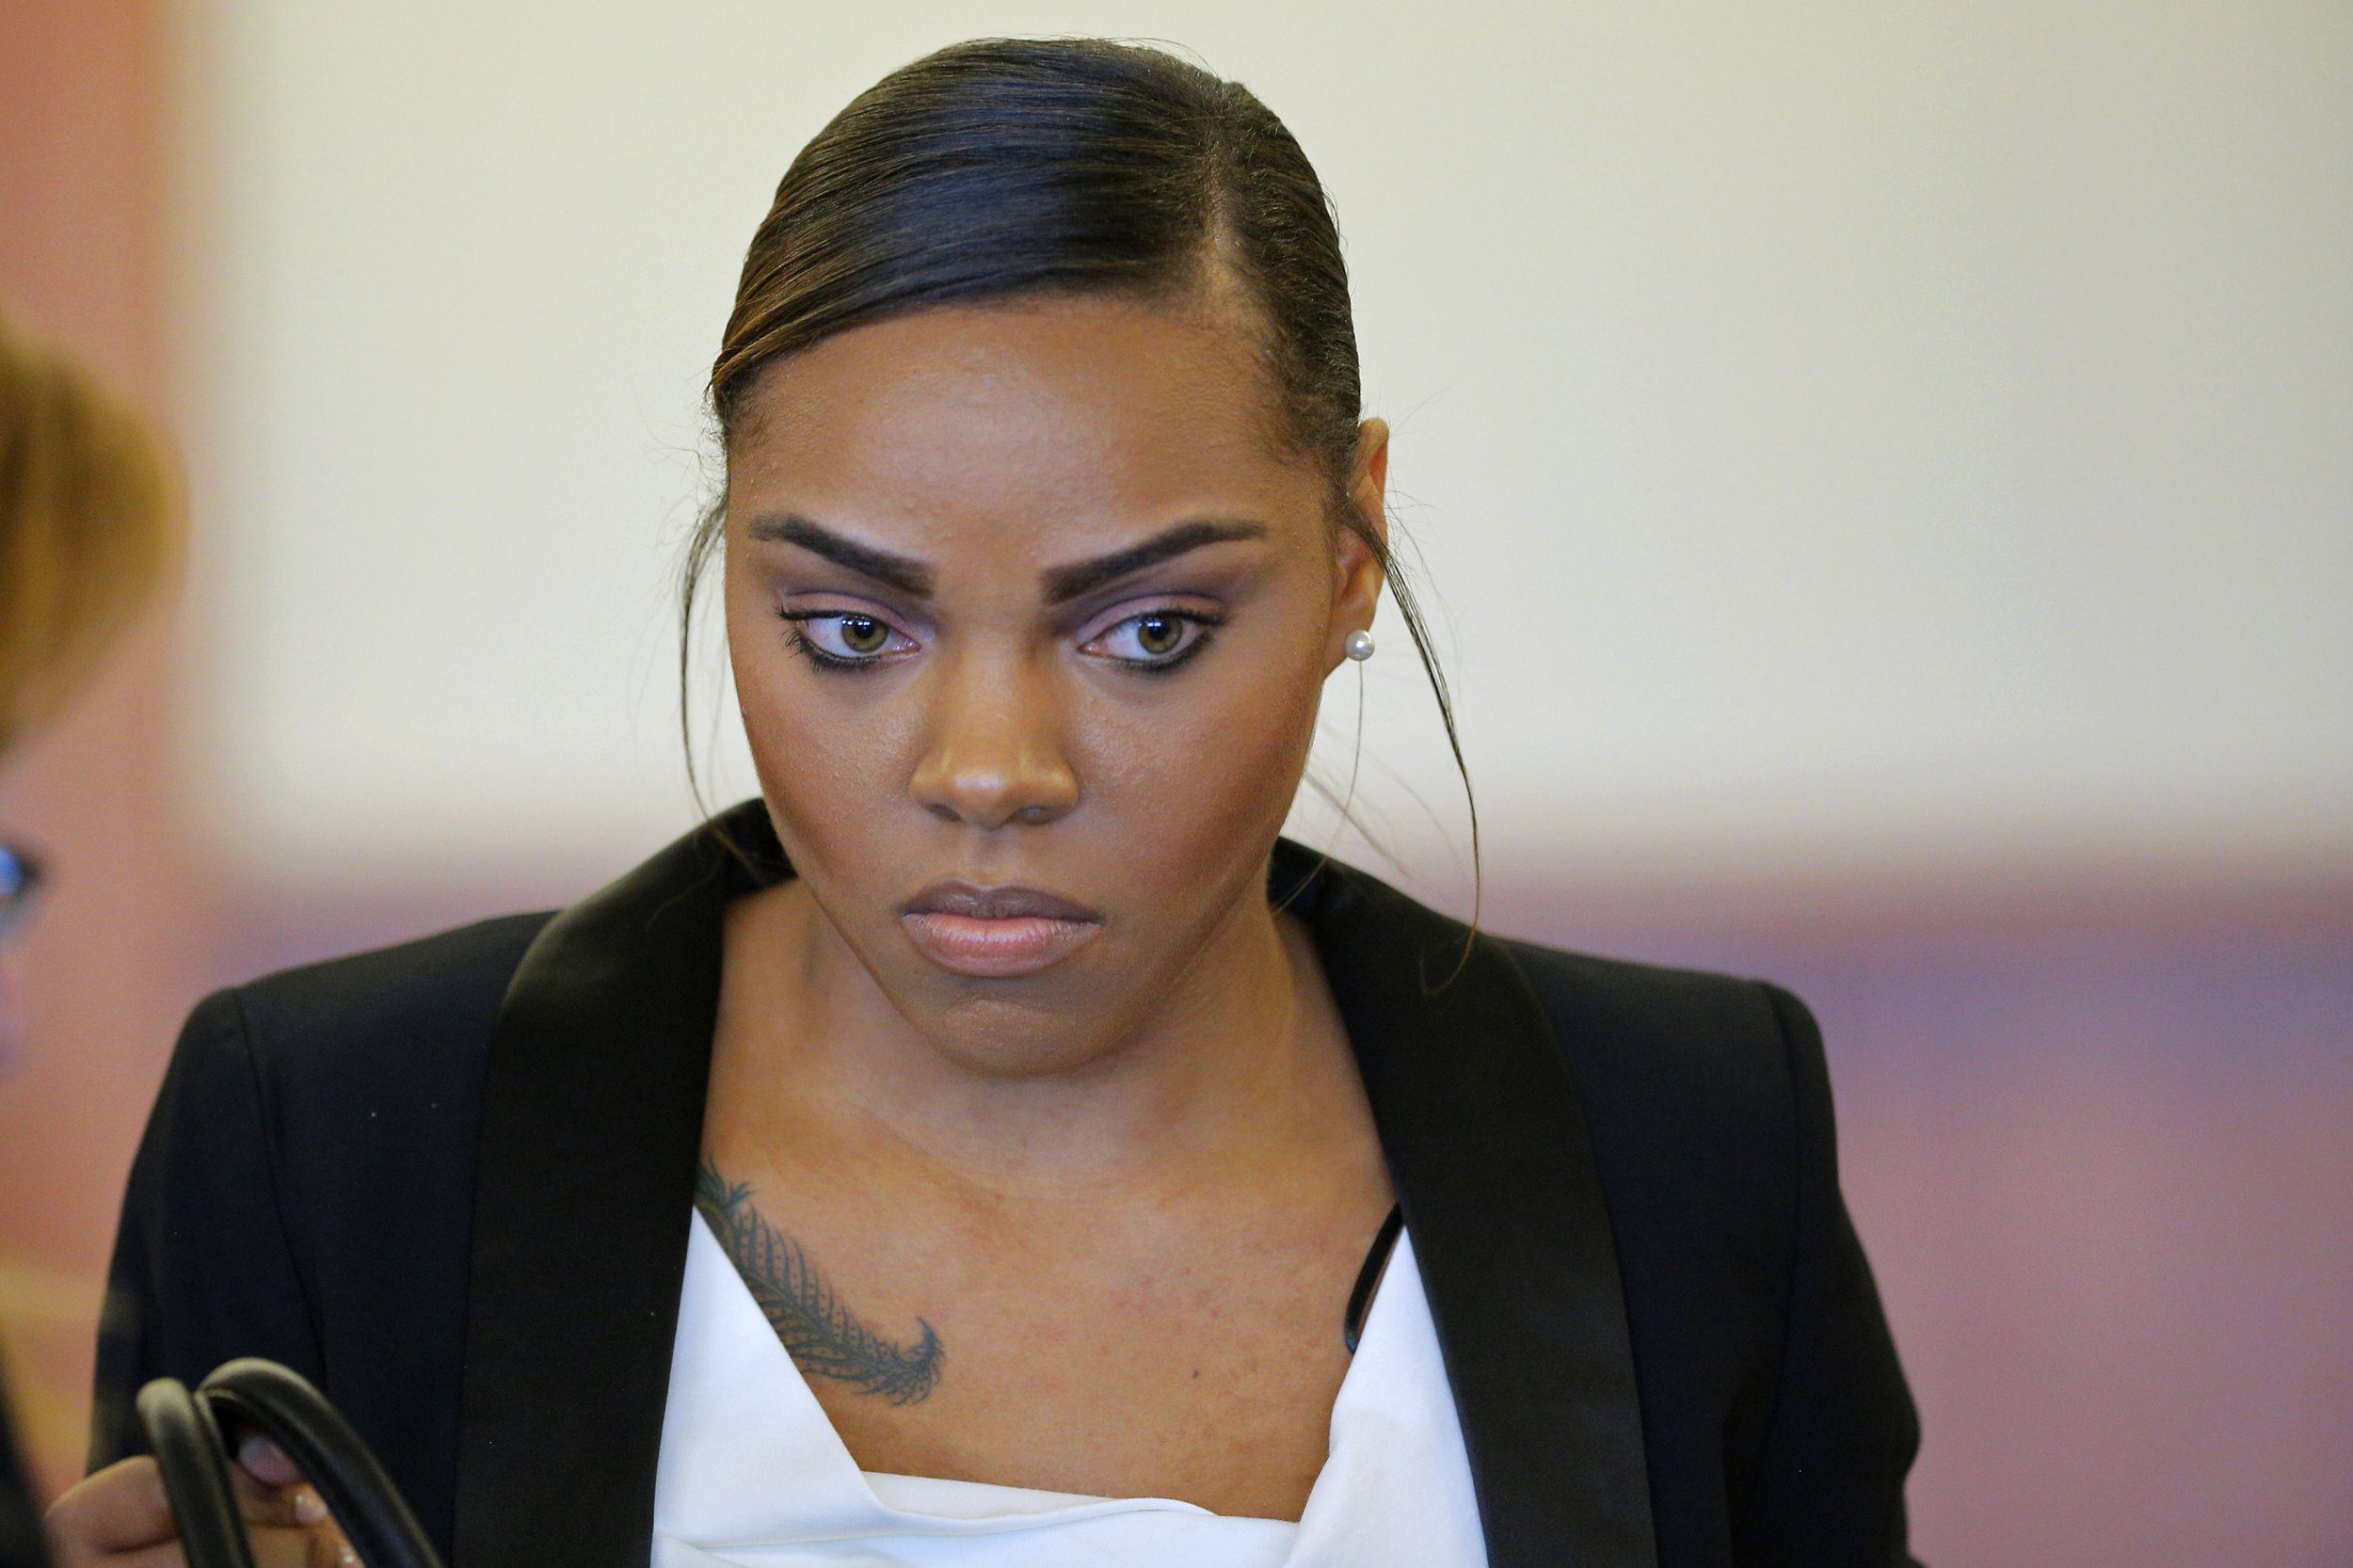 Aaron Hernandez's fiancée pissed about the hanging jokes at Tom Brady's Roast